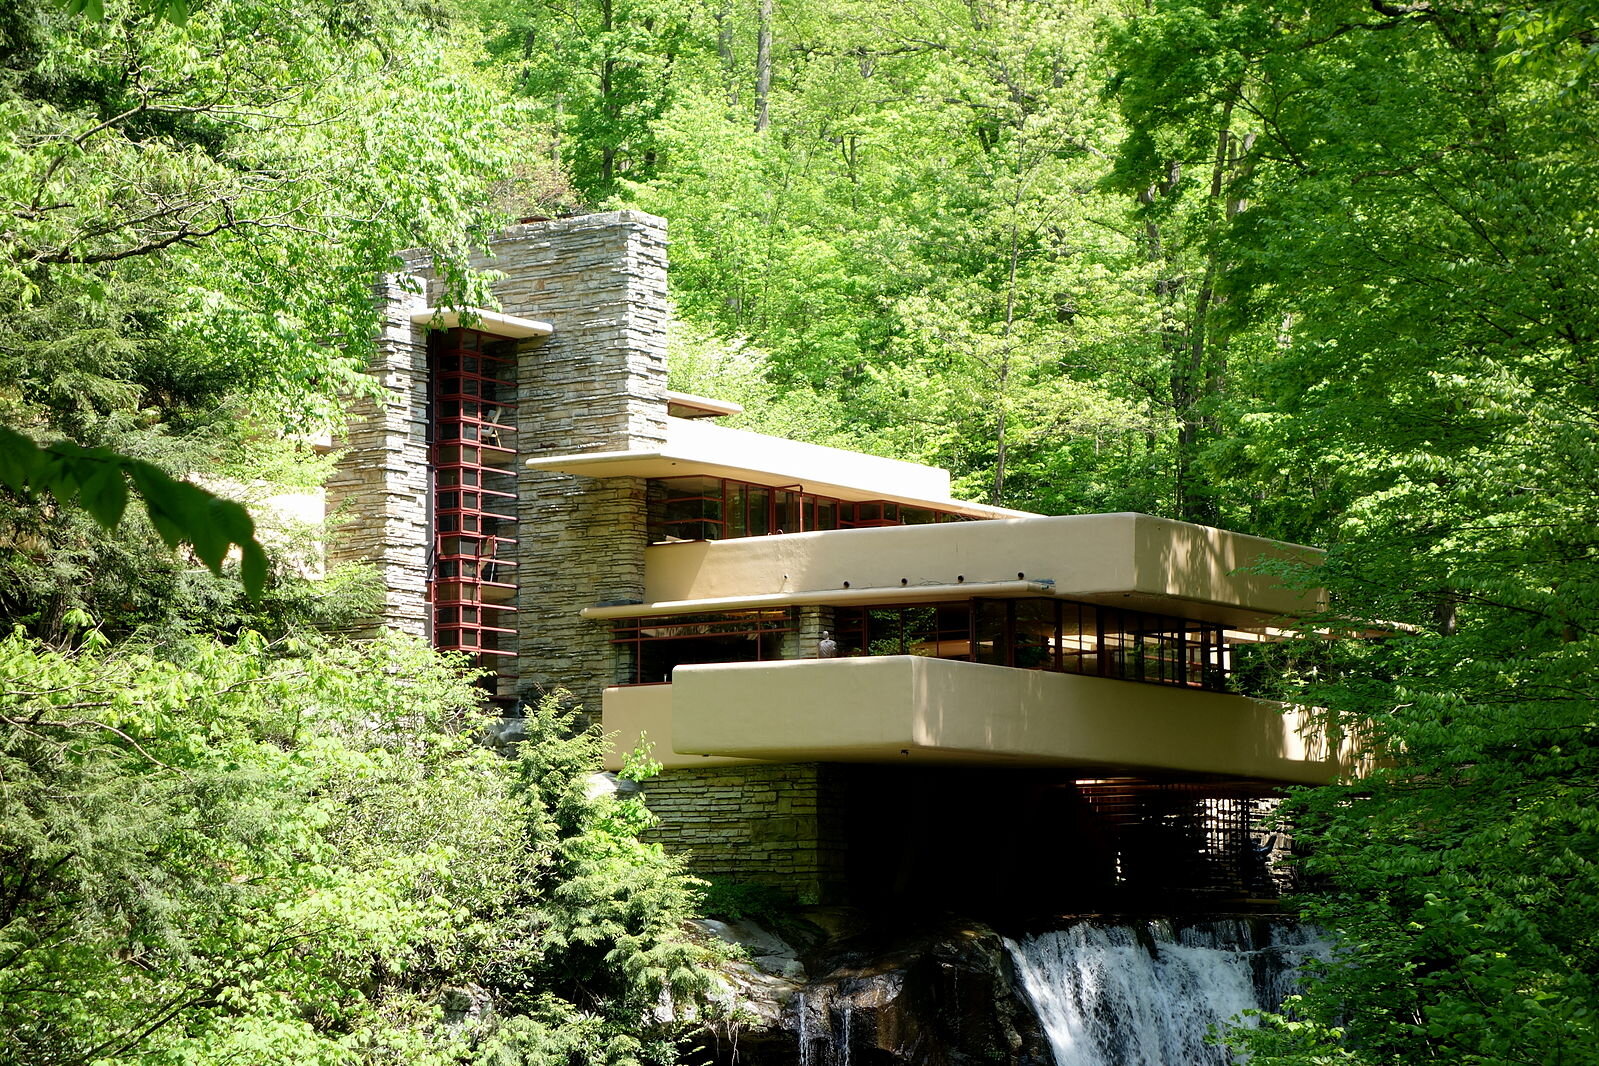  Here is a home Wright designed on top of a waterfall! 